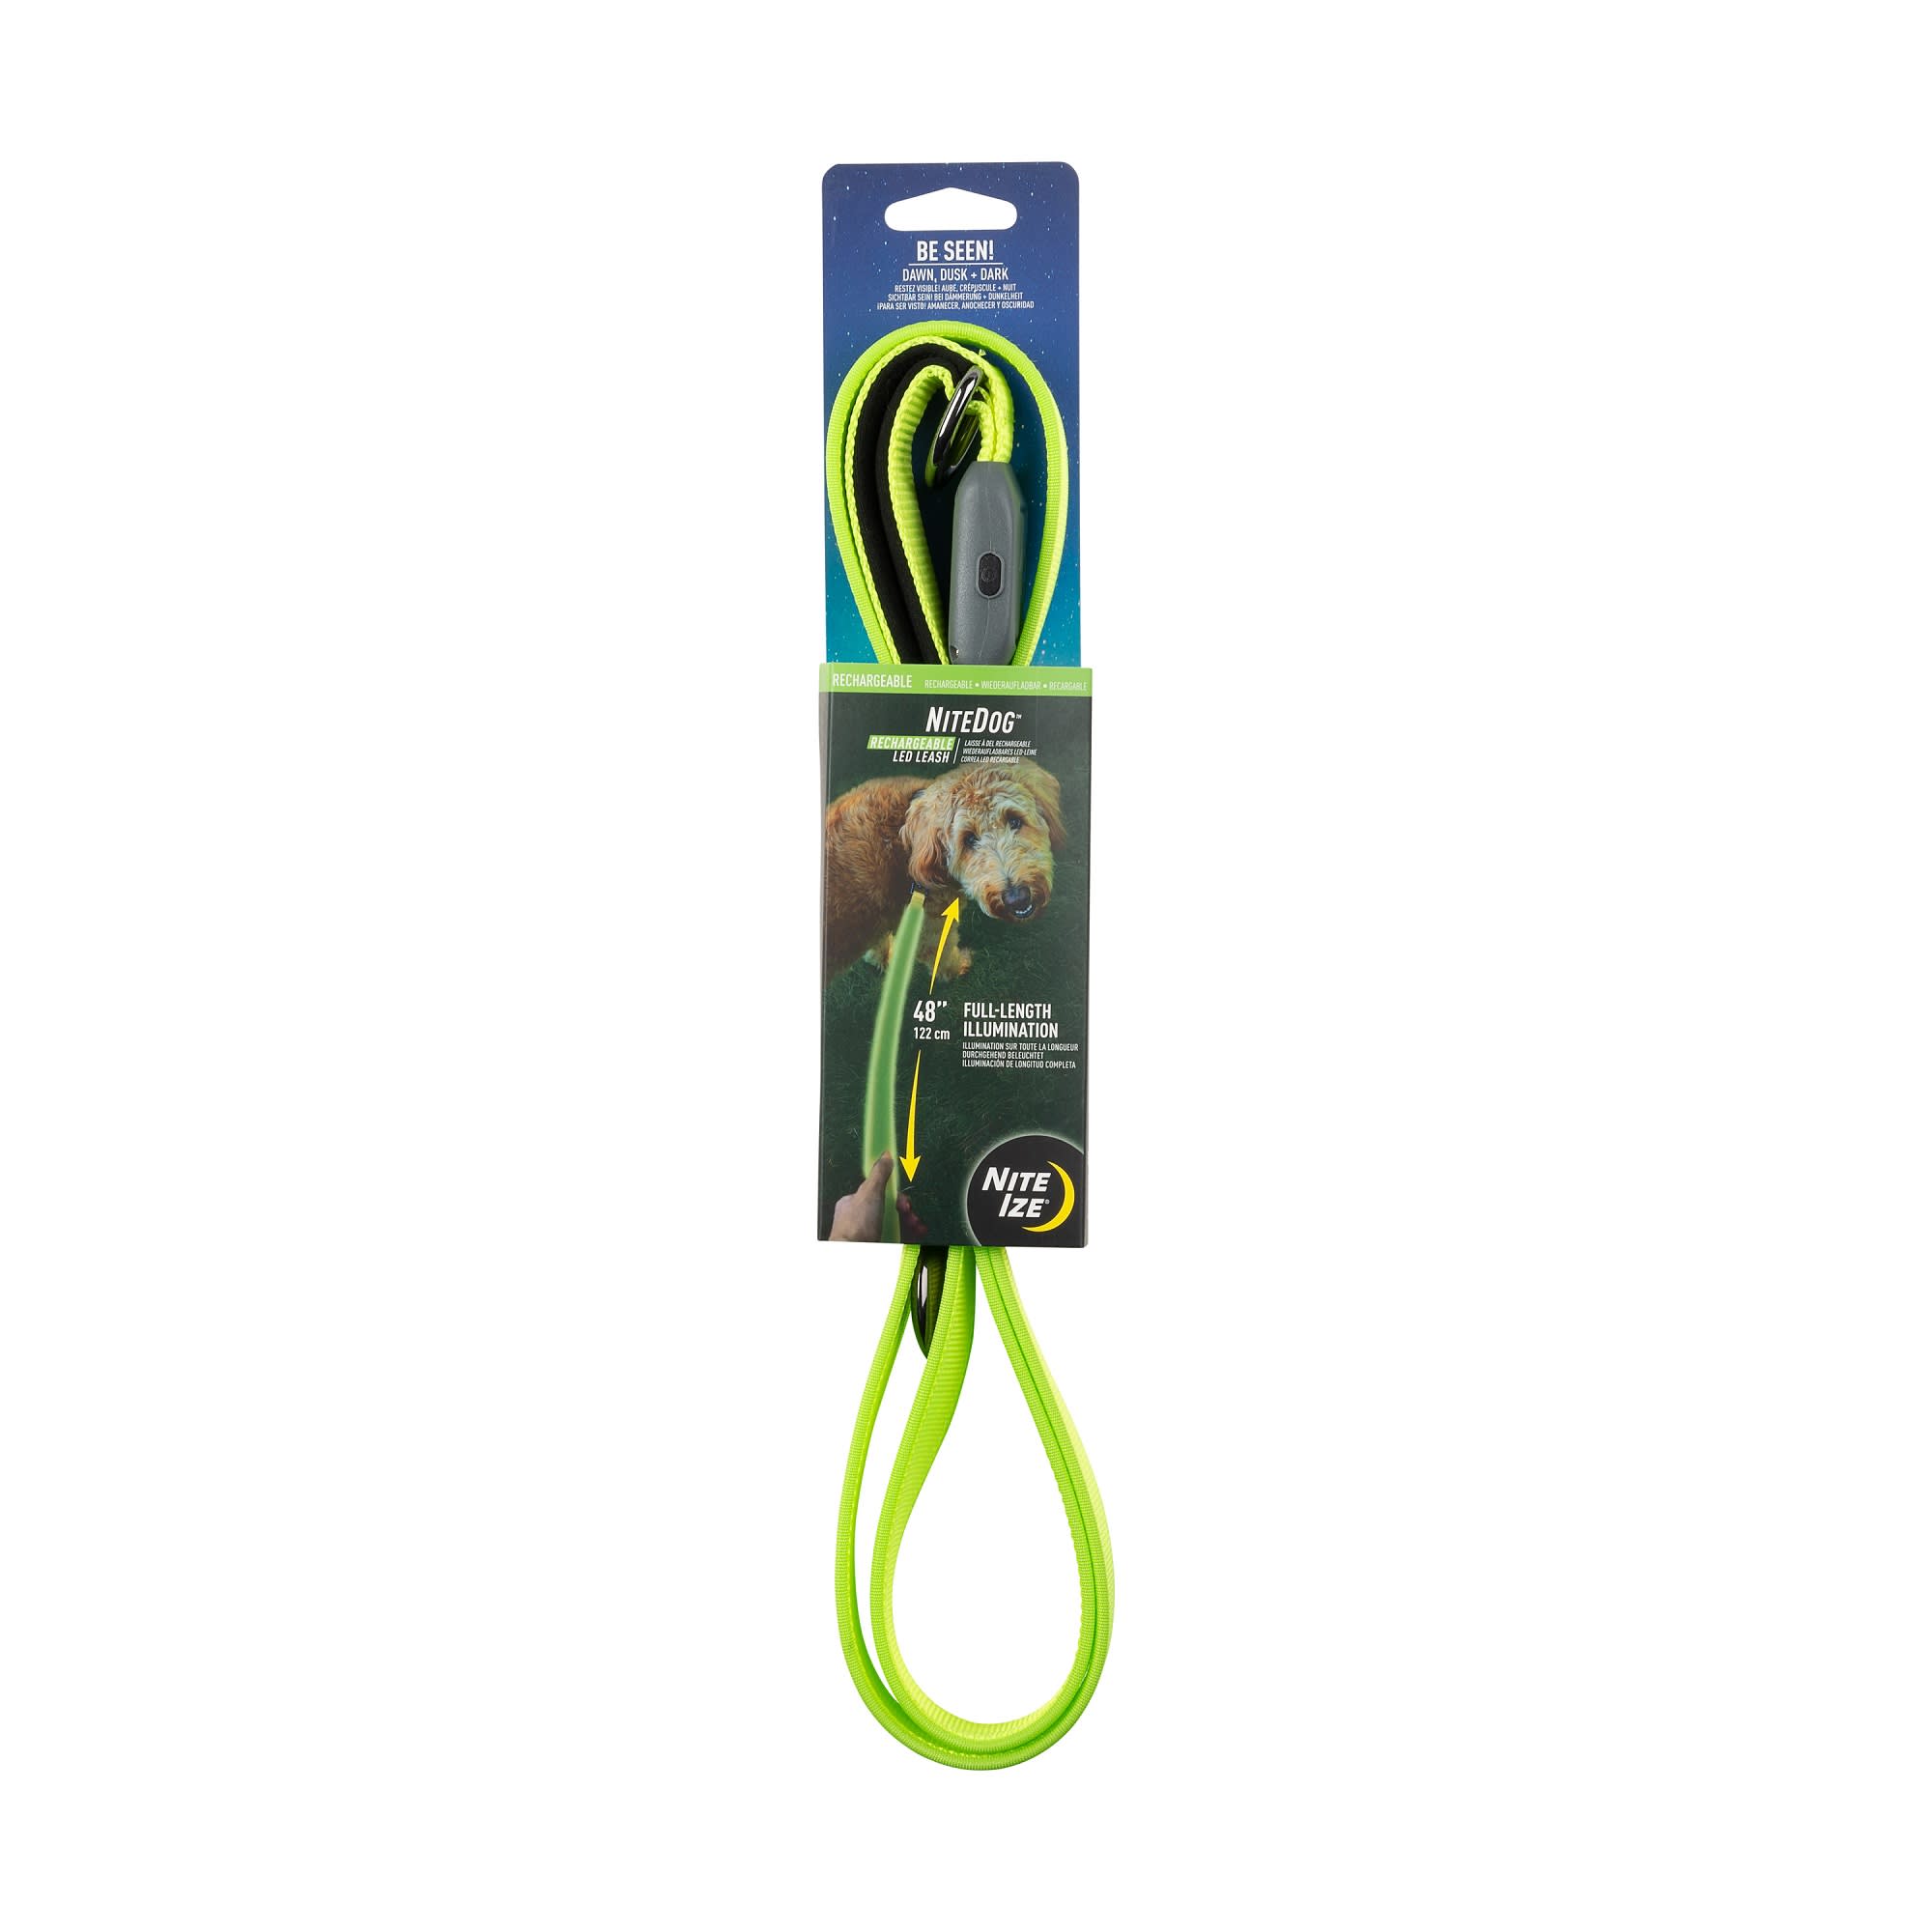 Photos - Collar / Harnesses Nite Ize NiteDog Green Rechargeable LED Dog Leash, One Size Fits 